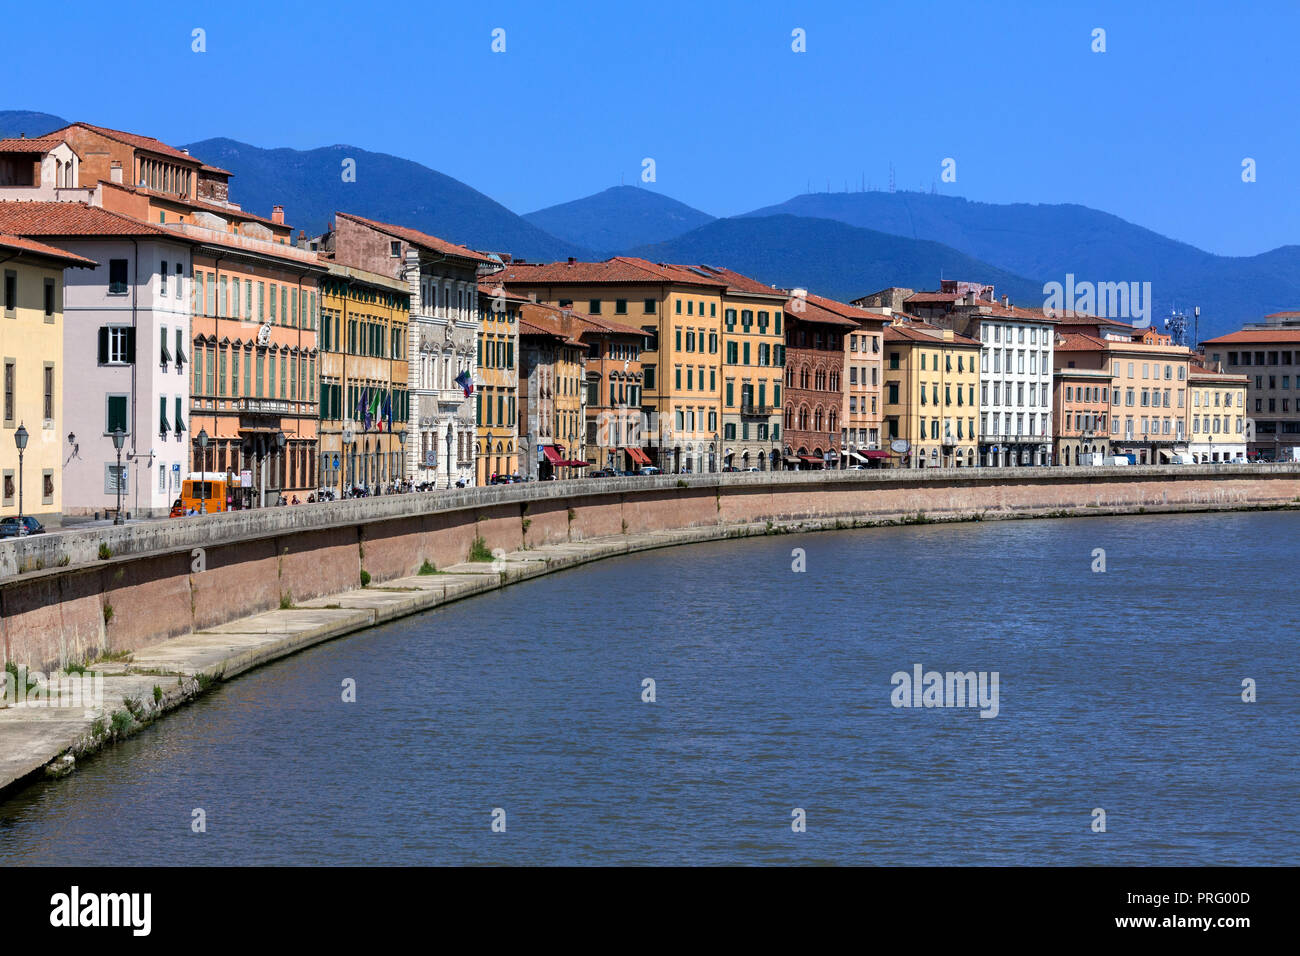 The over the River Arno of the city of Pisa in the Tuscany region of central Italy. Stock Photo